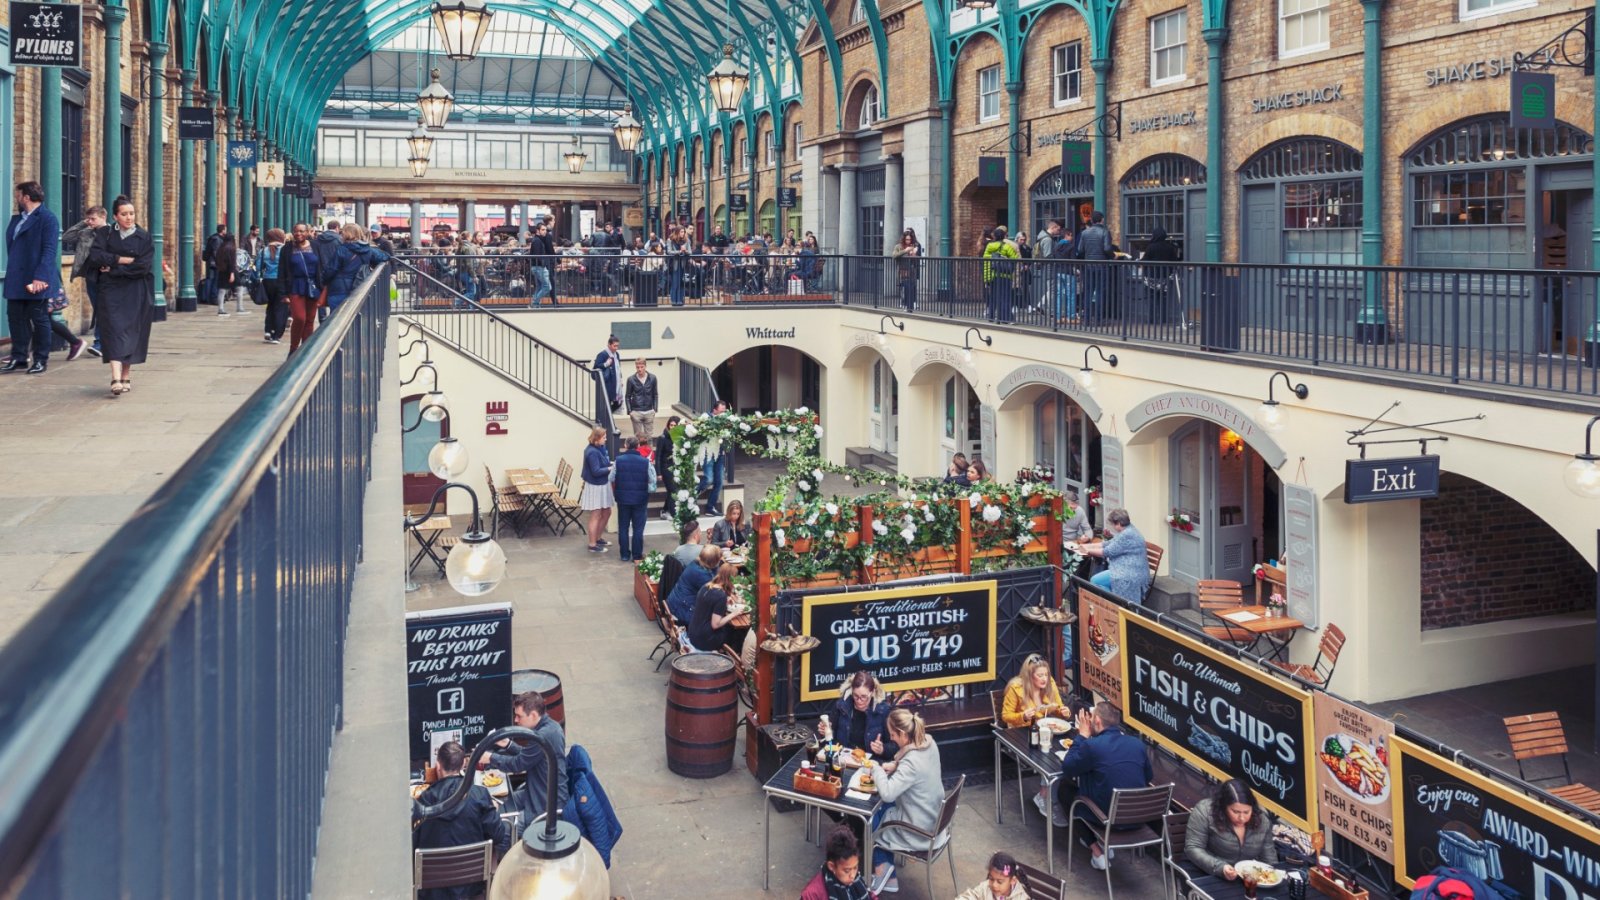 Where to eat in London: discover unique restaurants in Covent Garden